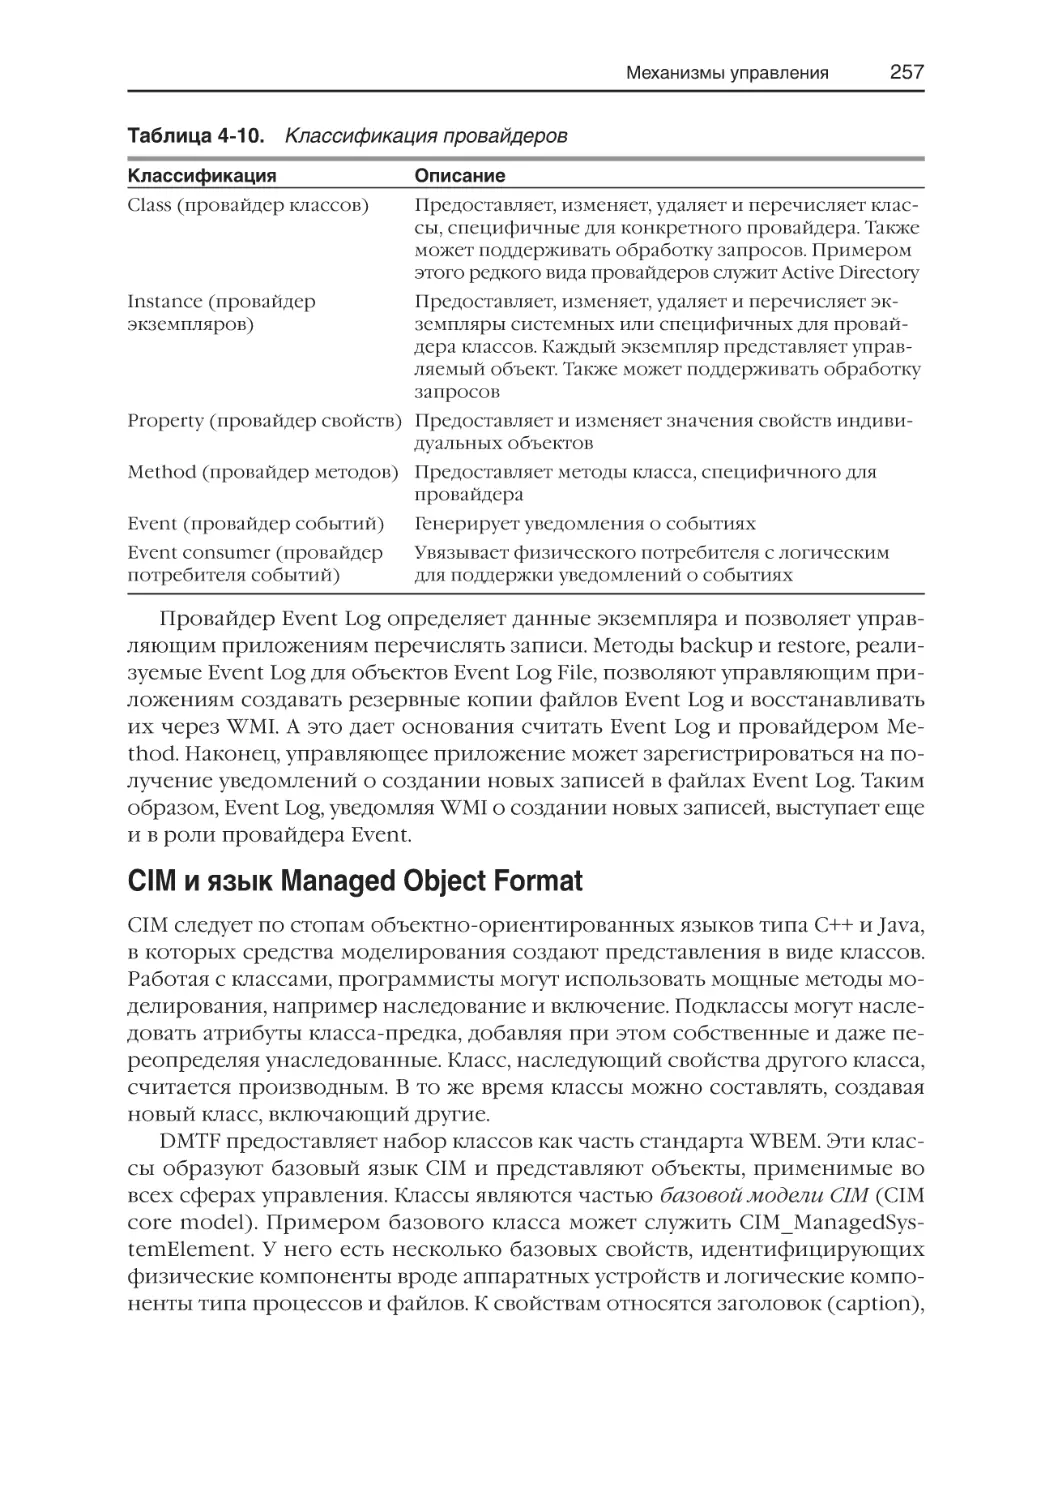 CIM и язык Managed Object Format